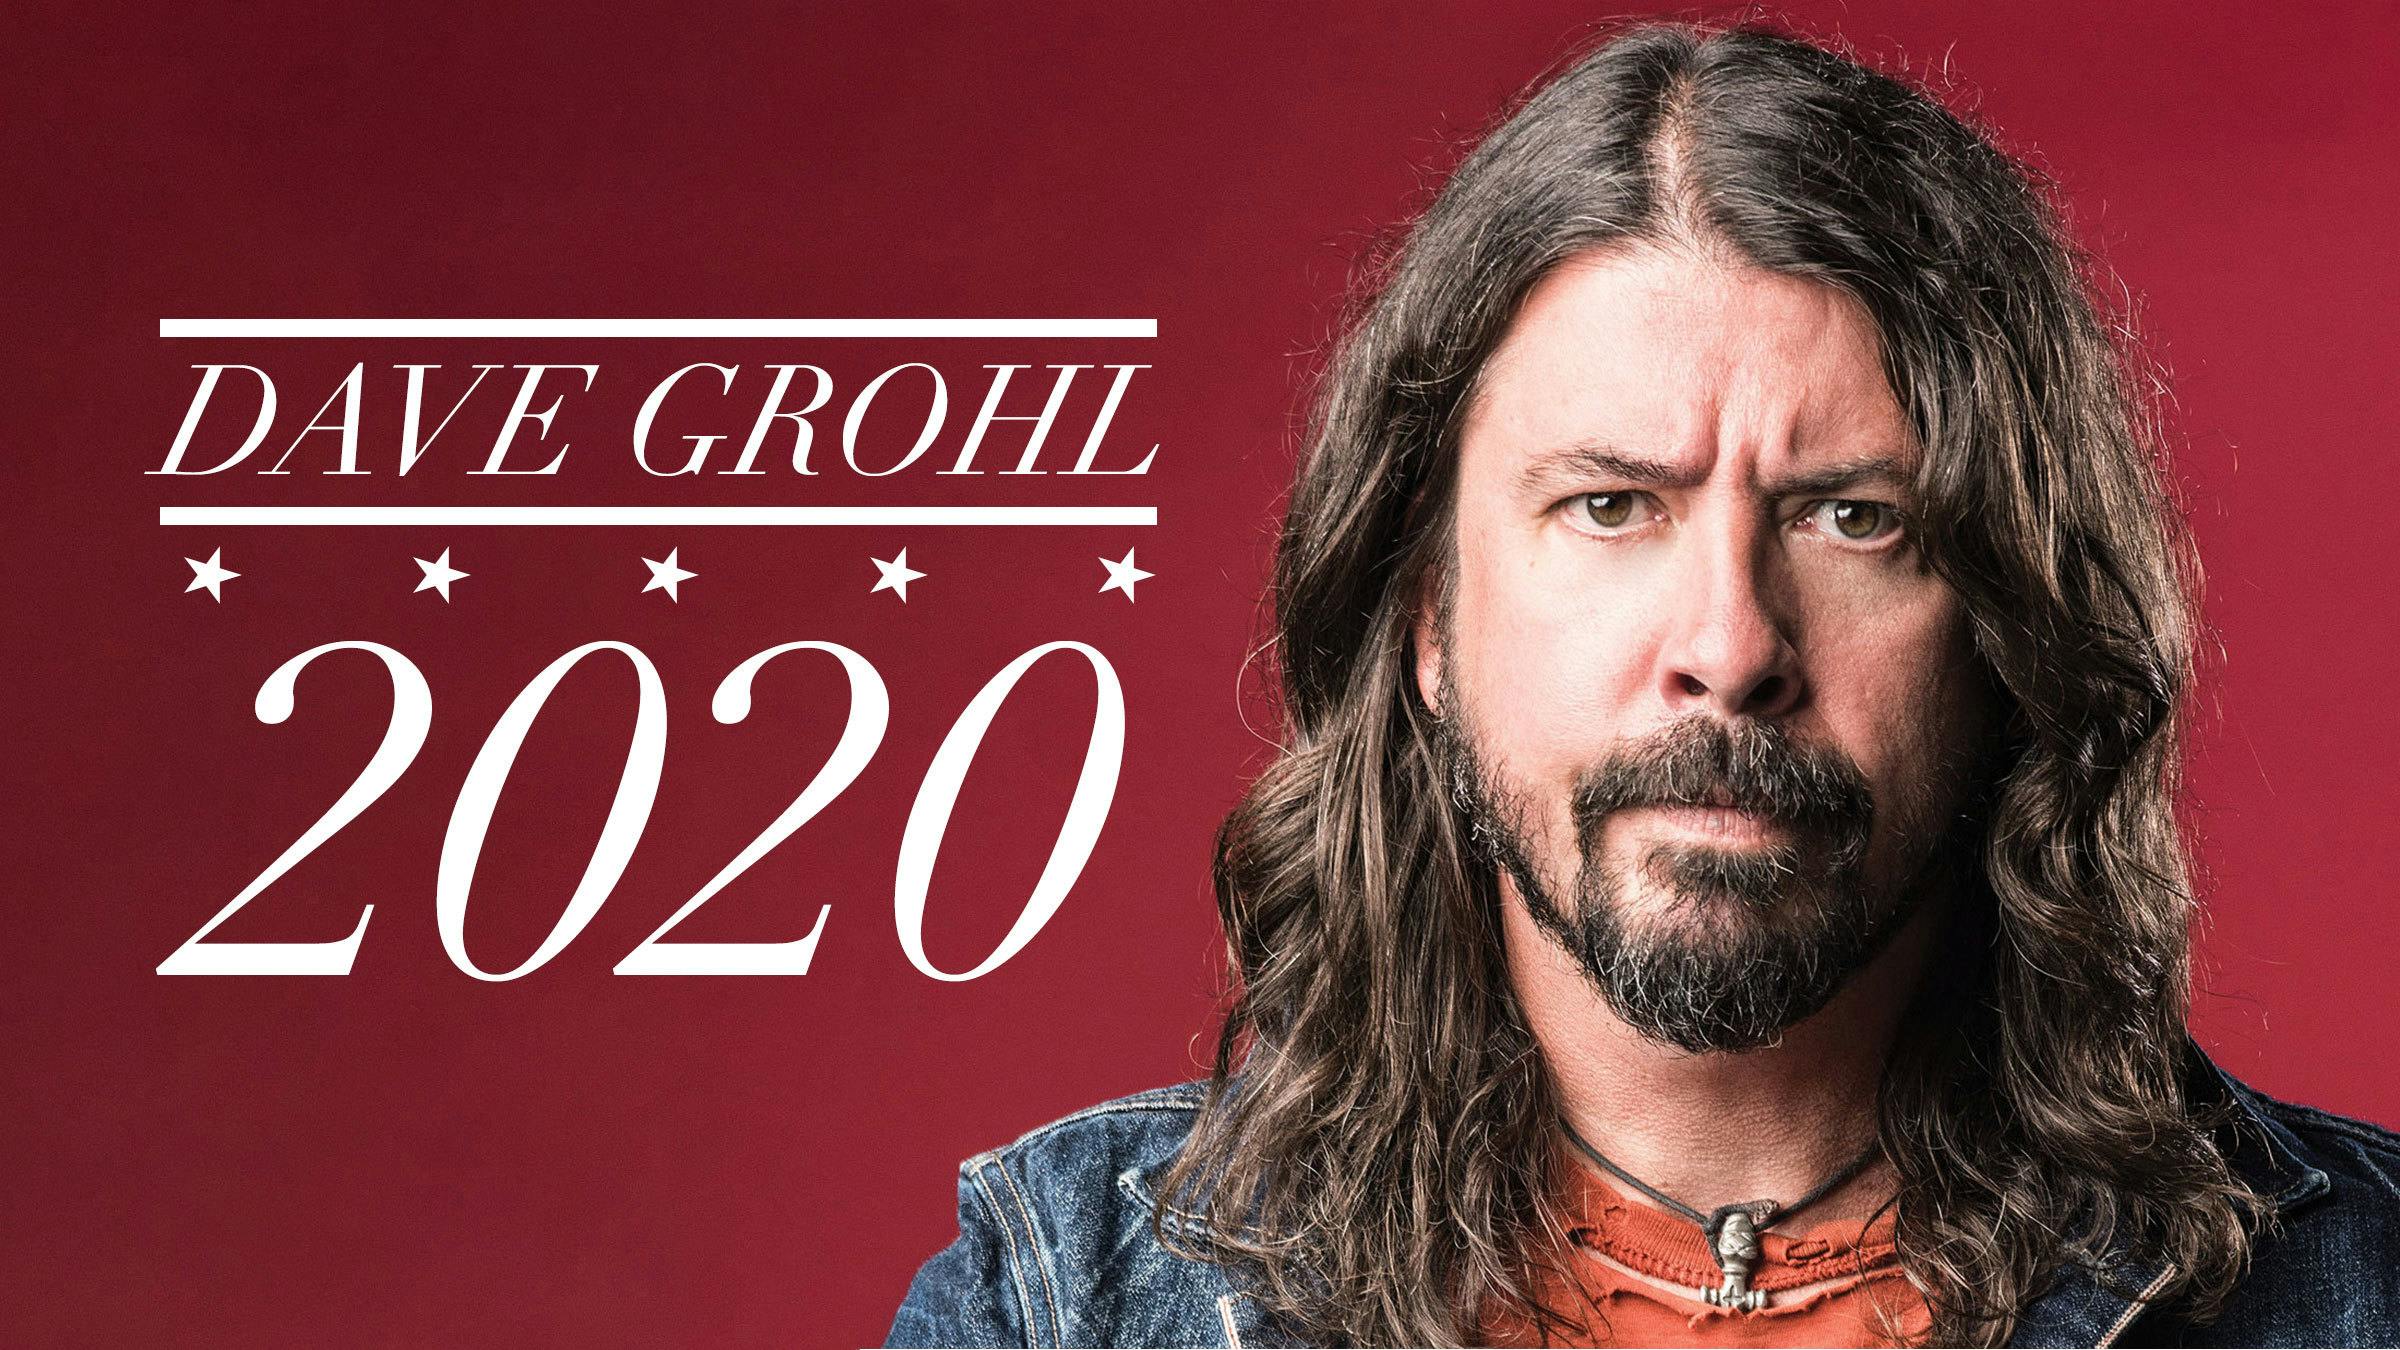 Dave Grohl Announces He Is Running For President in 2020